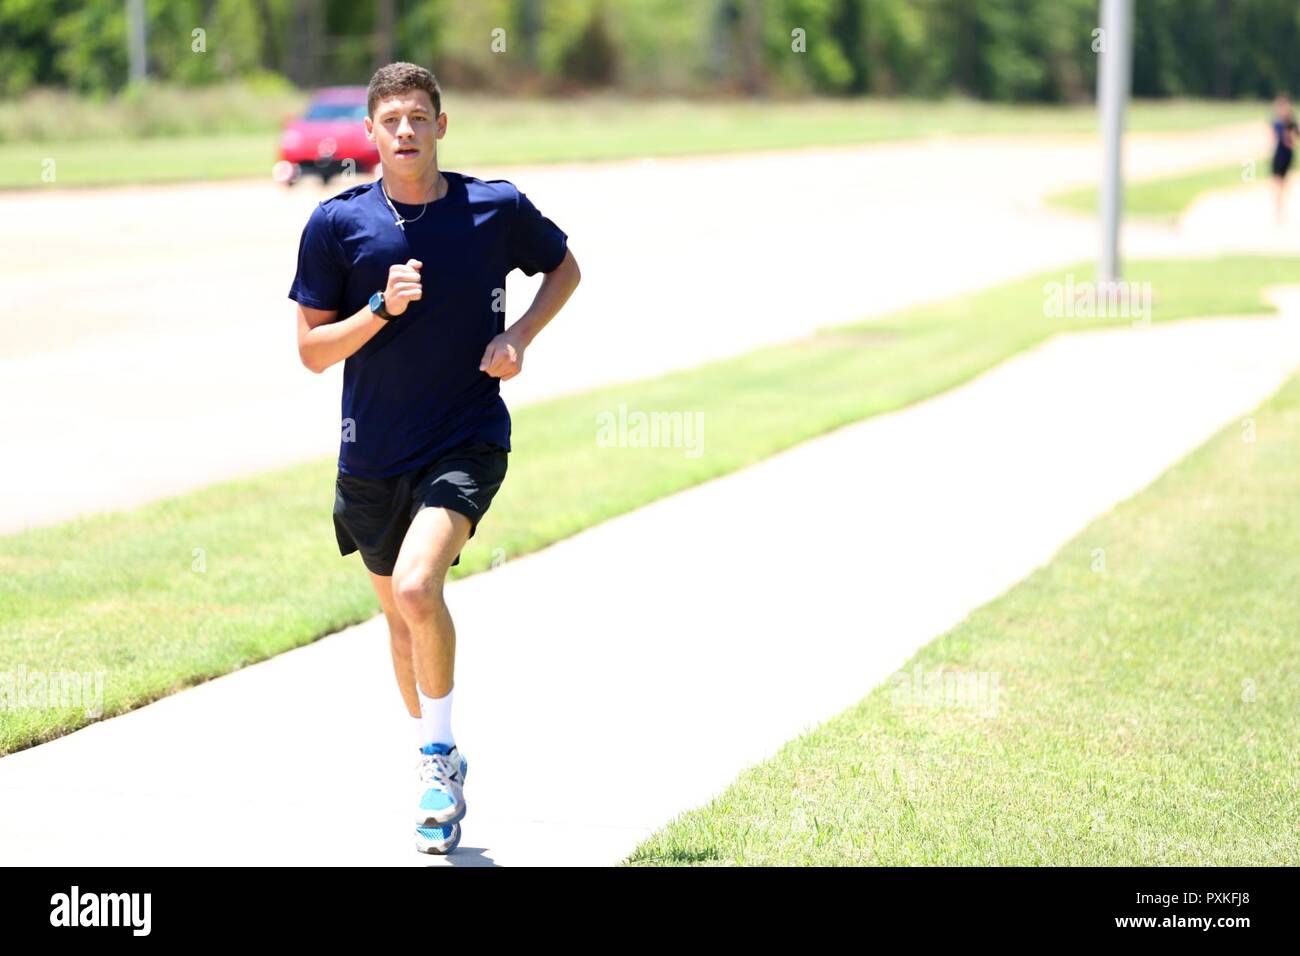 SHREVEPORT, LA – (June 8, 2017) Future Sailor David Morgan from Bossier City, LA, finishes first in the 1.5-mile run during the final event of the physical screening test (PST) conducted by Navy Recruiting District Houston’s Special Warfare (SPECWAR) Scout Team in Shreveport, LA, Thurs., June 8. More than 40 applicants participated in the PST. Their results will be placed into a national draft where the top performers will be selected to start SPECWAR training in their selected community – the Navy SEAL Teams, Special Warfare Combatant-Crew (SWCC), Explosive Ordnance Disposal (EOD), Navy Diver Stock Photo